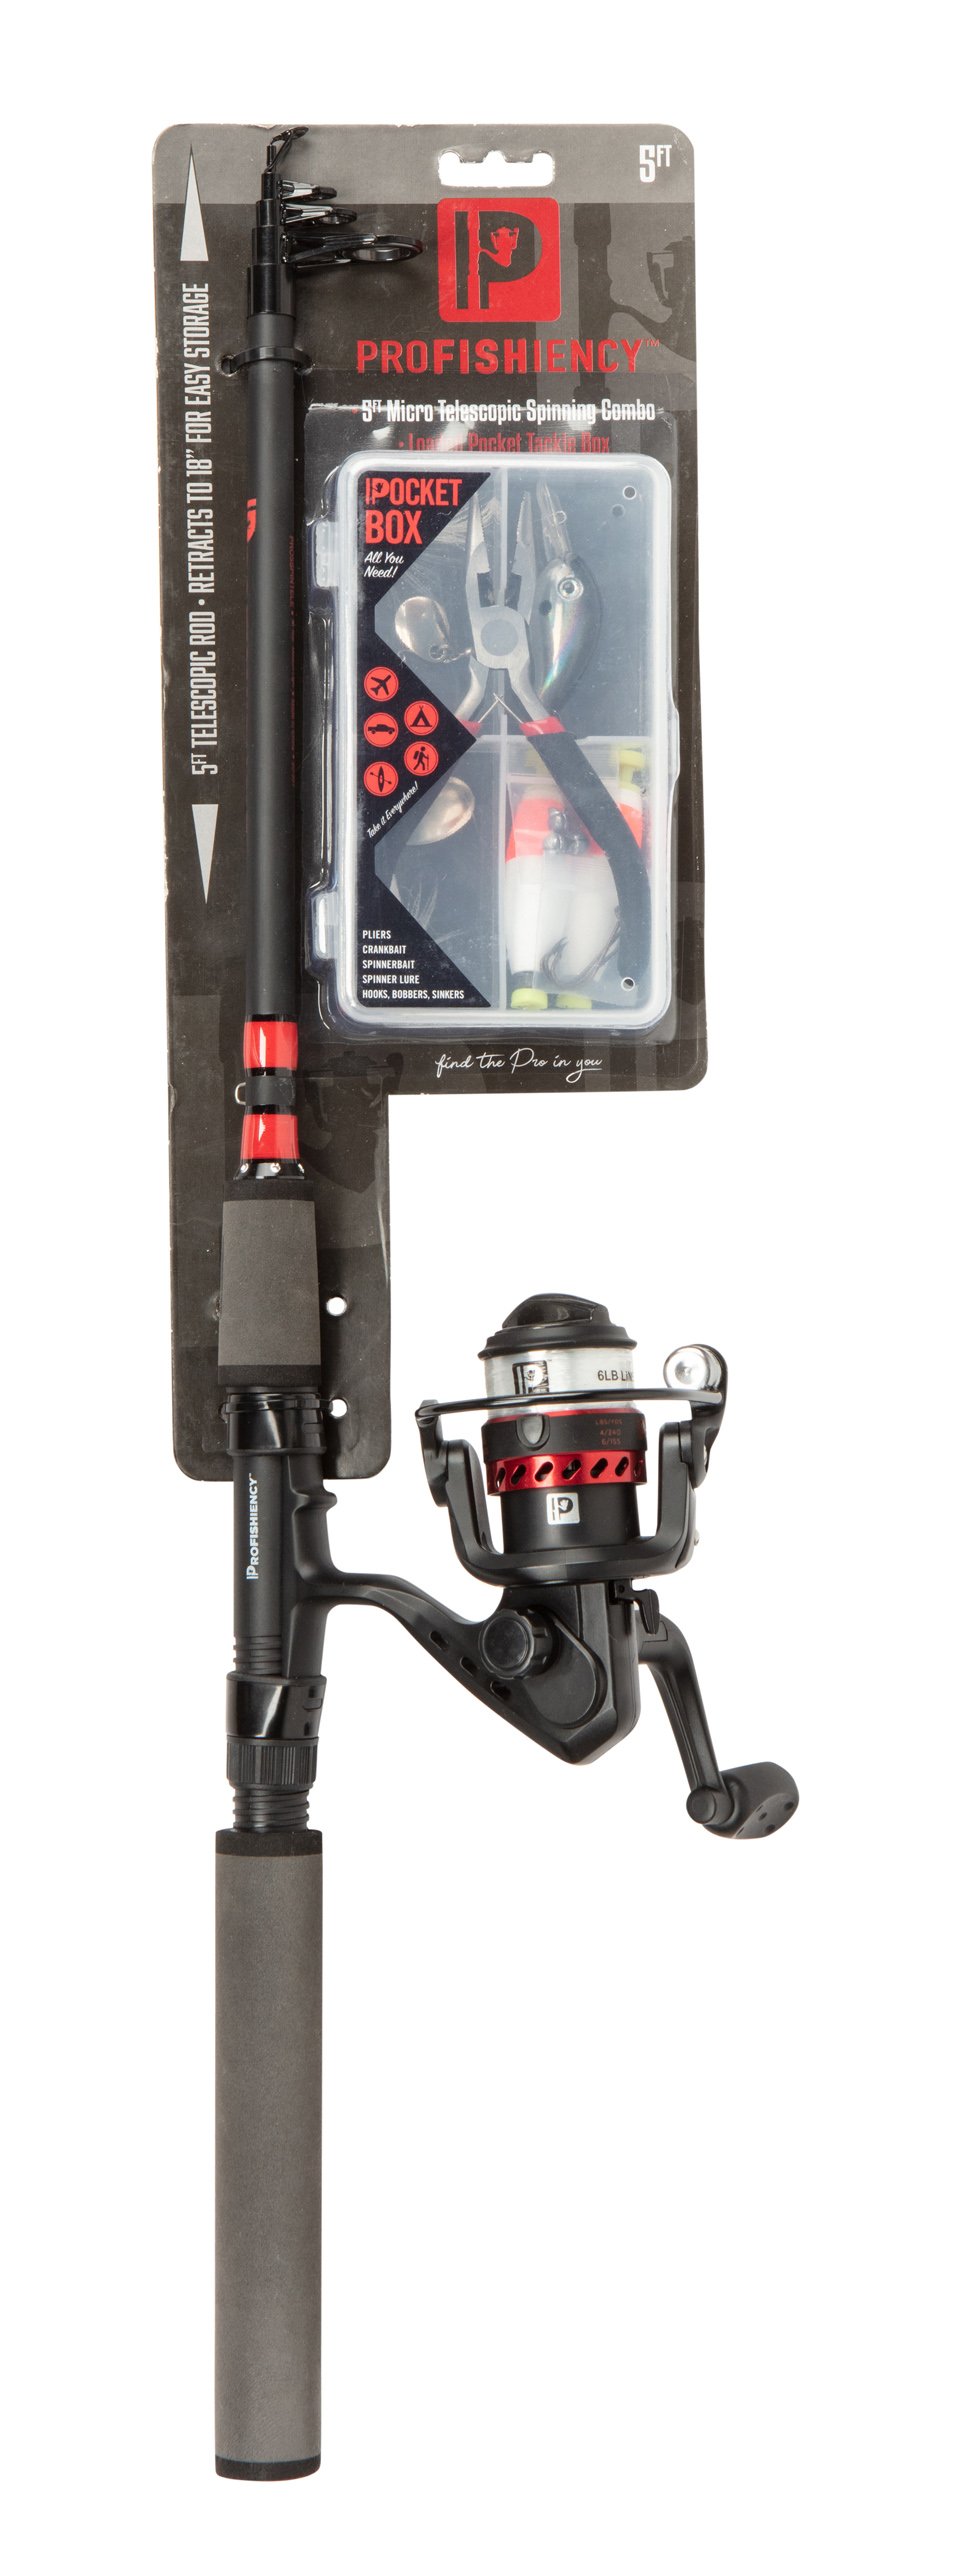 ProFISHiency 5 Micro Telescopic Spinning Combo PRO5SPINTELE , 50% Off —  CampSaver